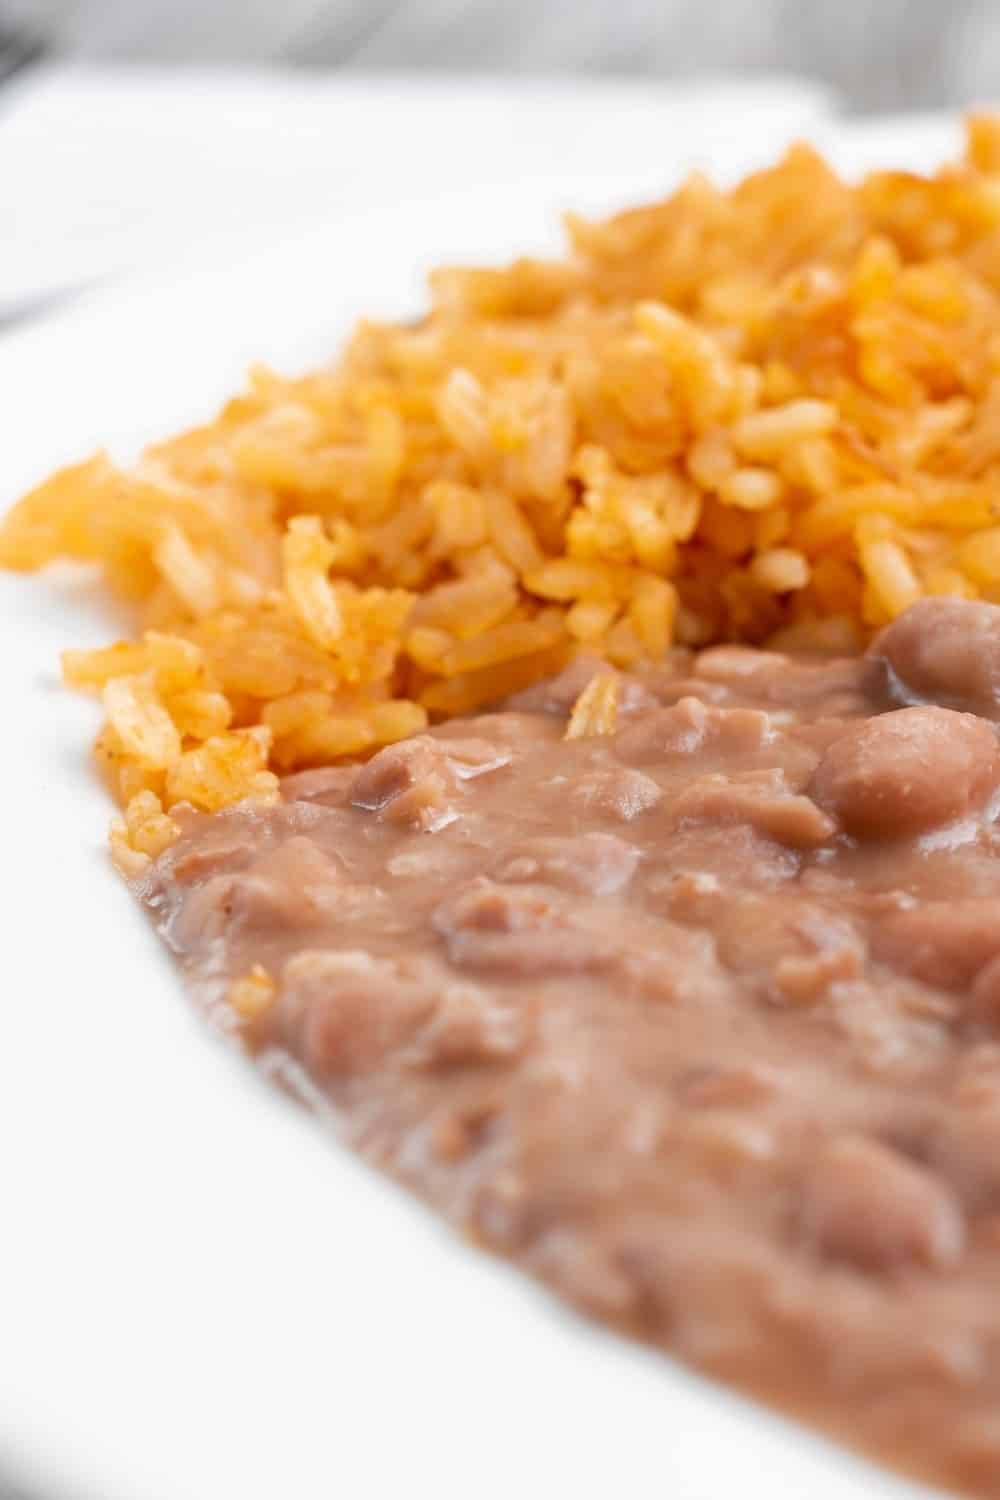 store-bought refried beans